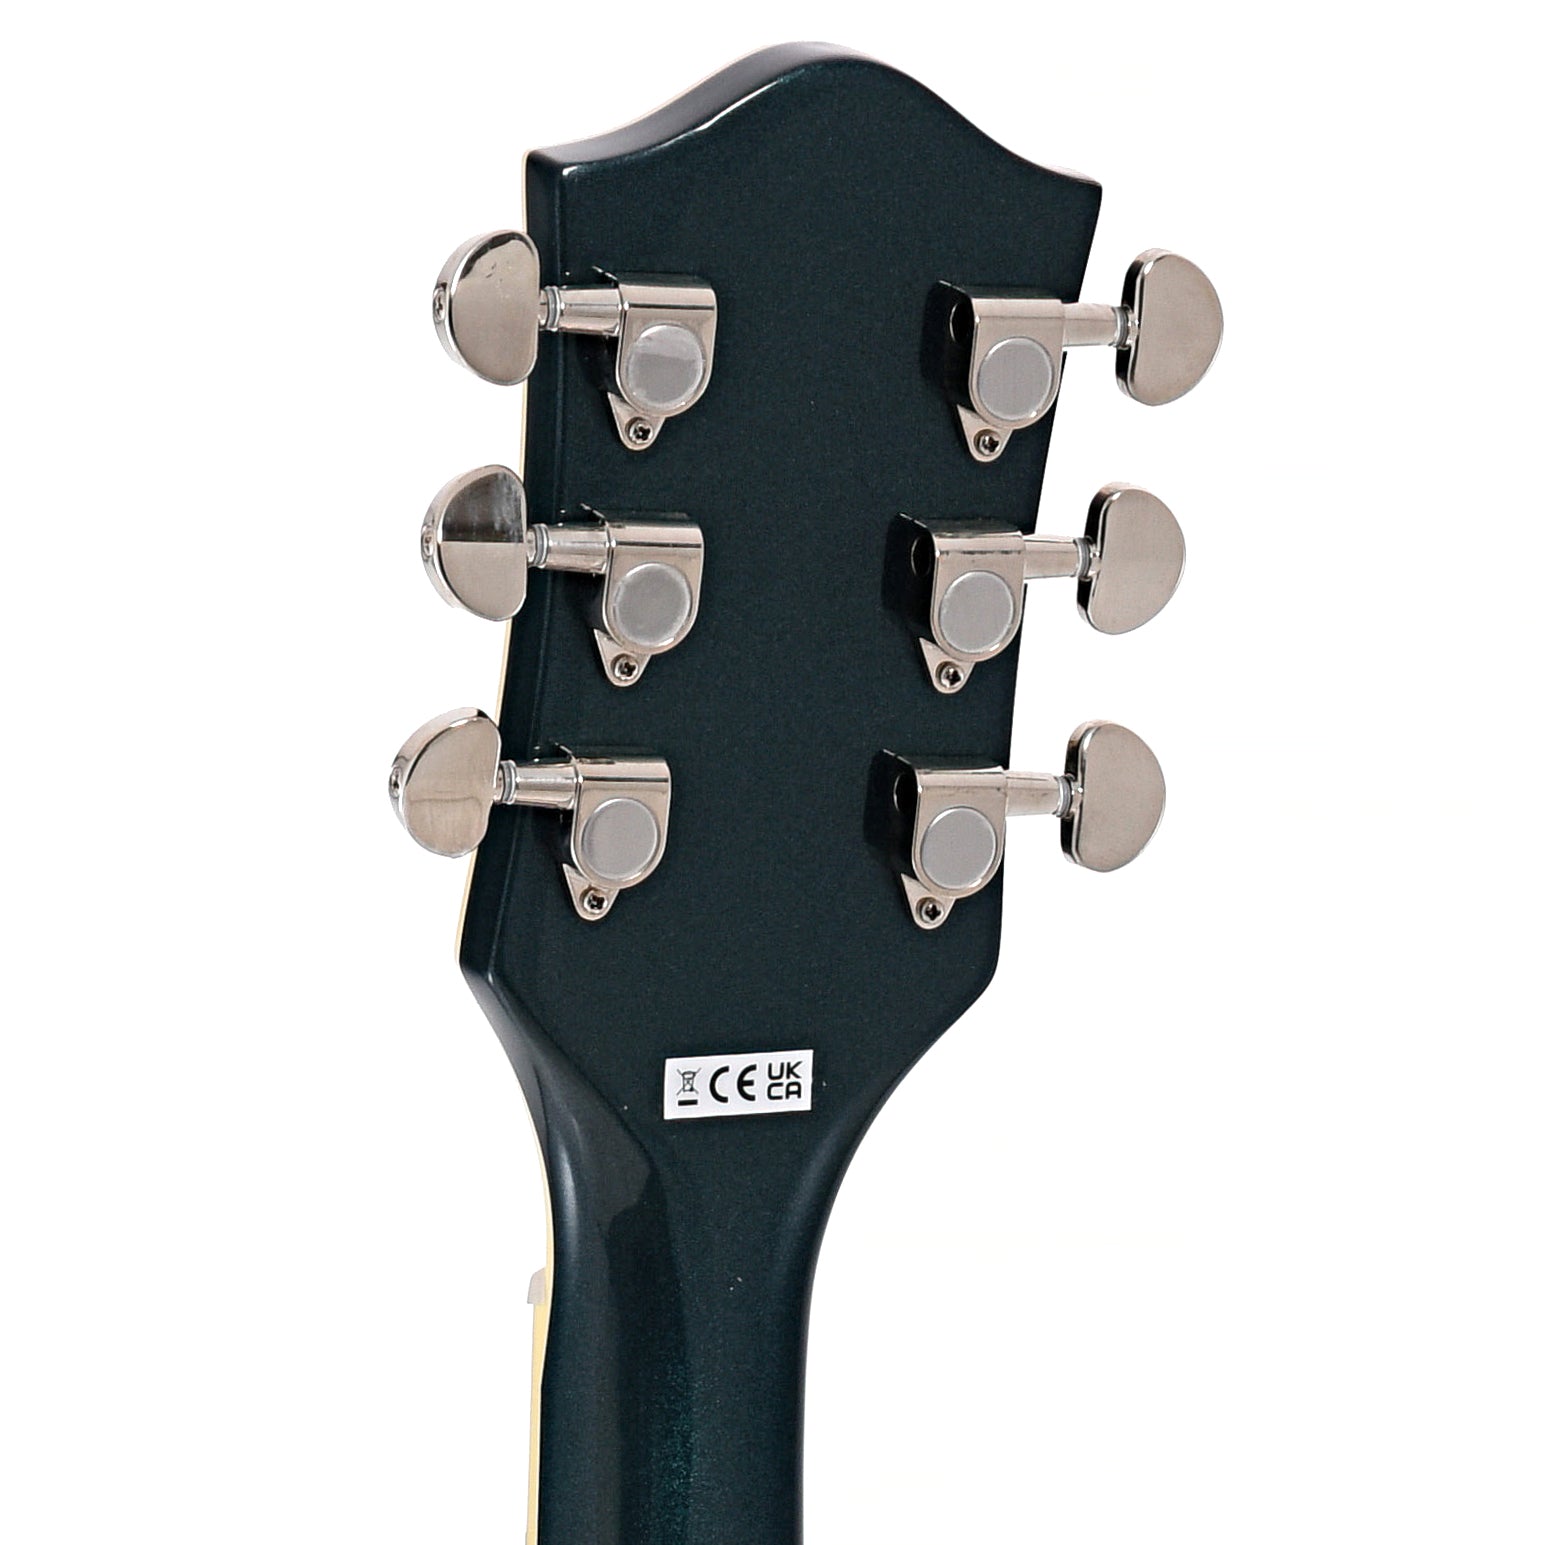 Image 8 of Gretsch G2622 Streamliner Center-Block Double Cutaway Hollow Body Guitar, Midnight Sapphire- SKU# G2622-MDSPH : Product Type Hollow Body Electric Guitars : Elderly Instruments